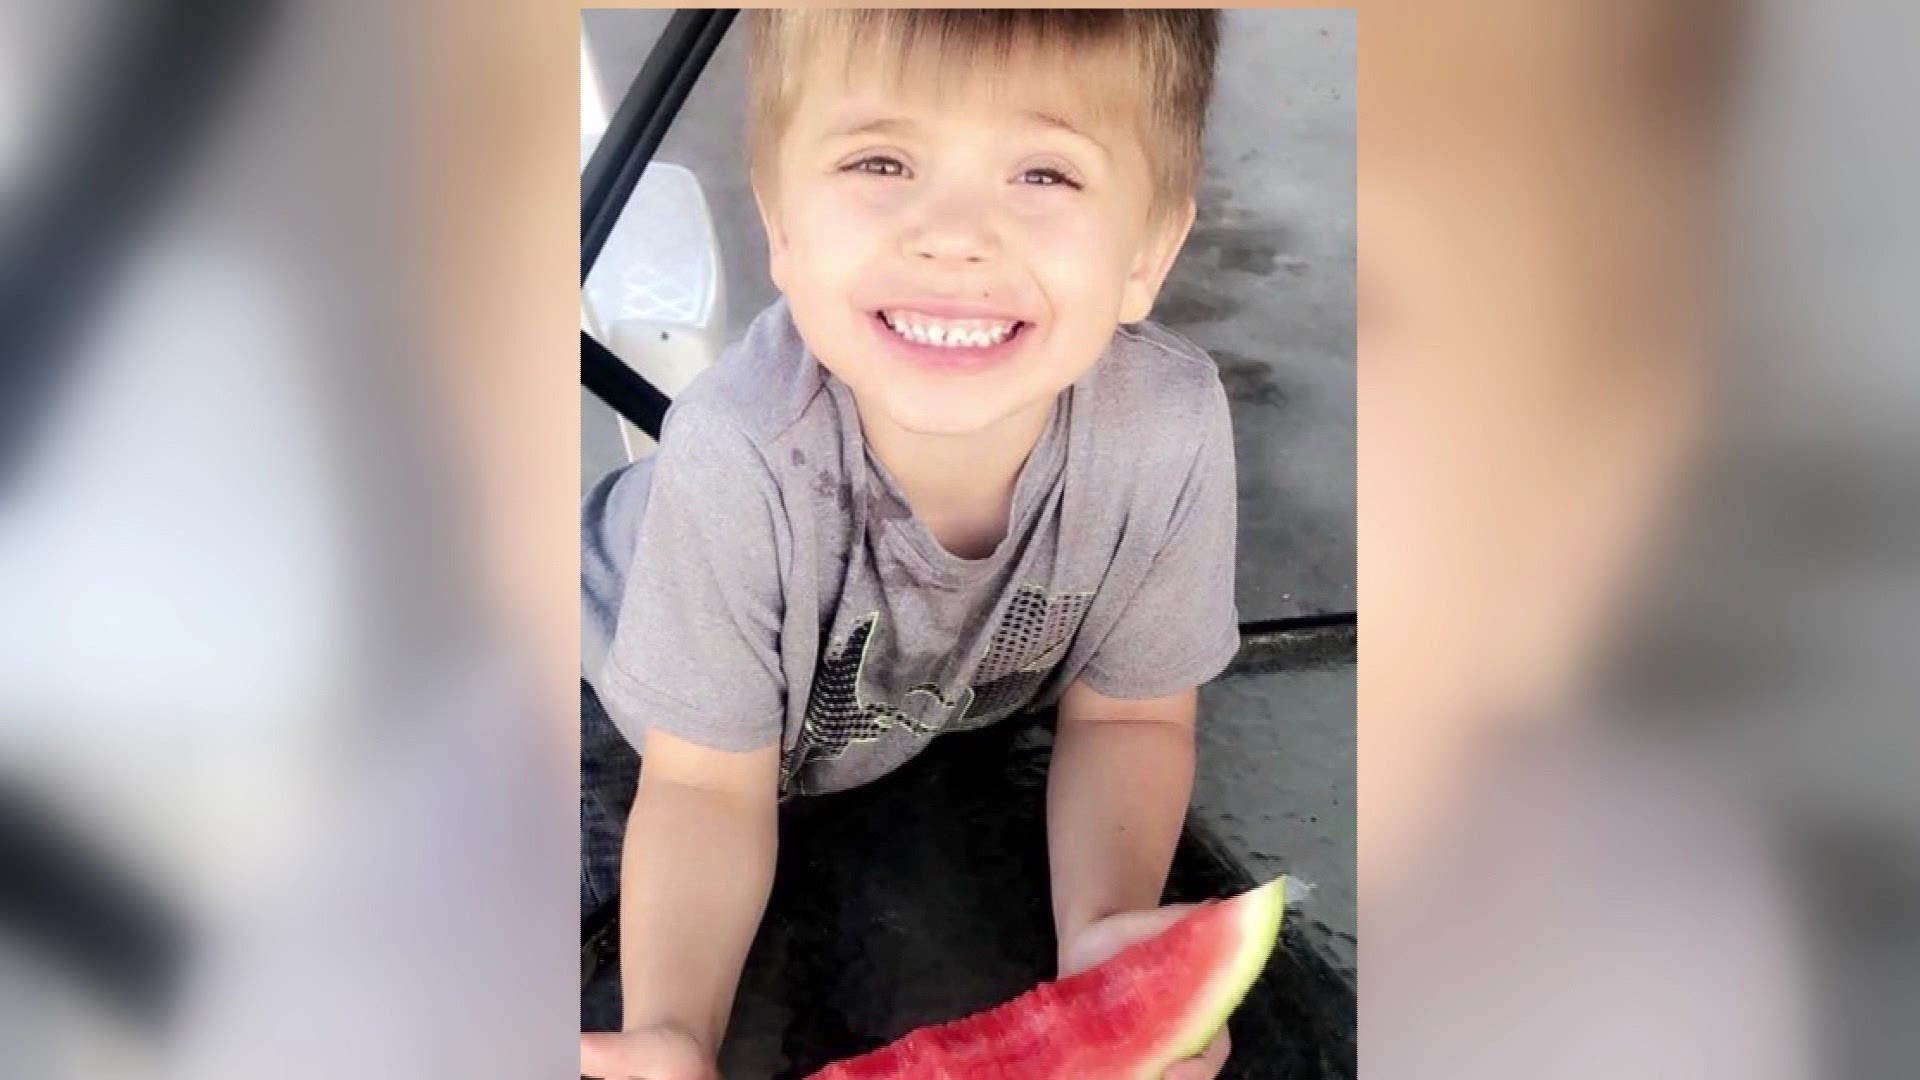 5-year-old Cannon Hinnant was shot to death in Wilson, North Carolina. Police have made an arrest in his death.